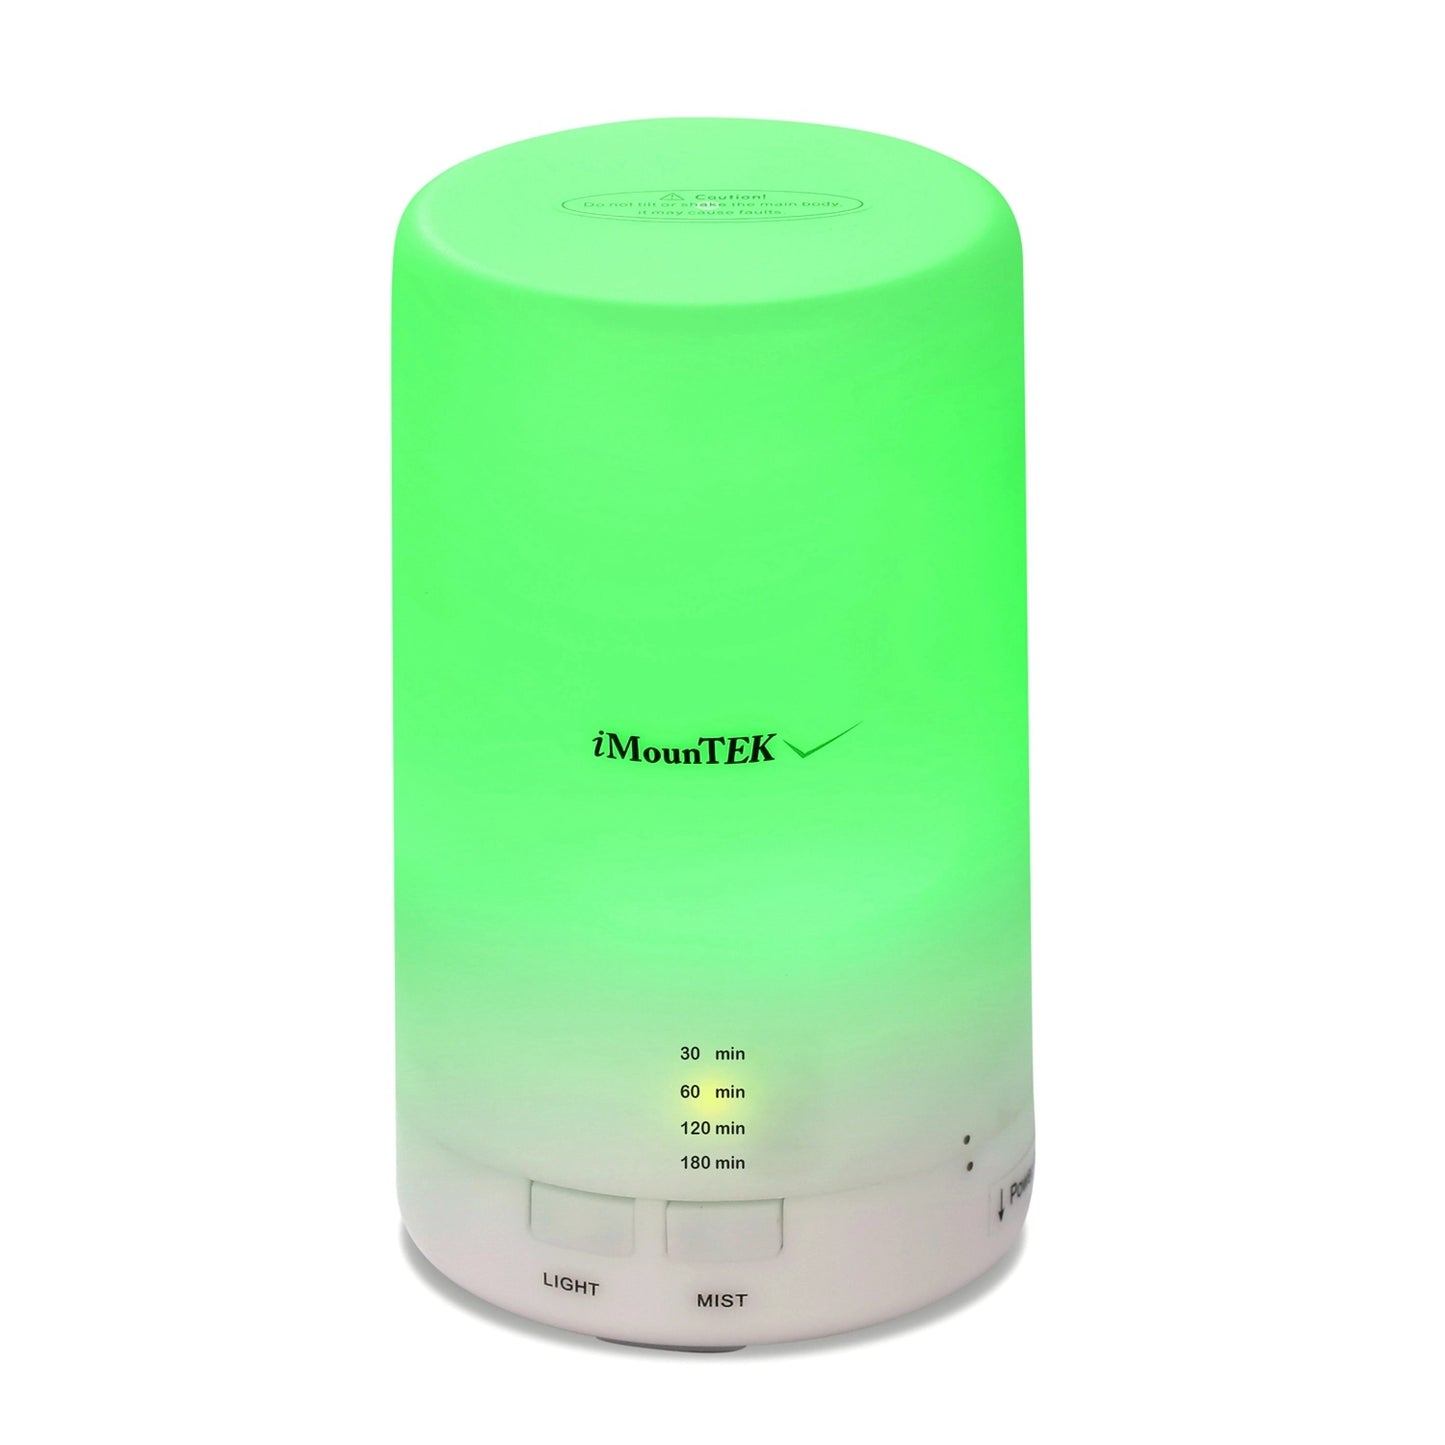 Mini Cool Mist Humidifier Ultrasonic Aroma Essential Oil Diffuser with 7 Color LED Lights 4 Timer Settings